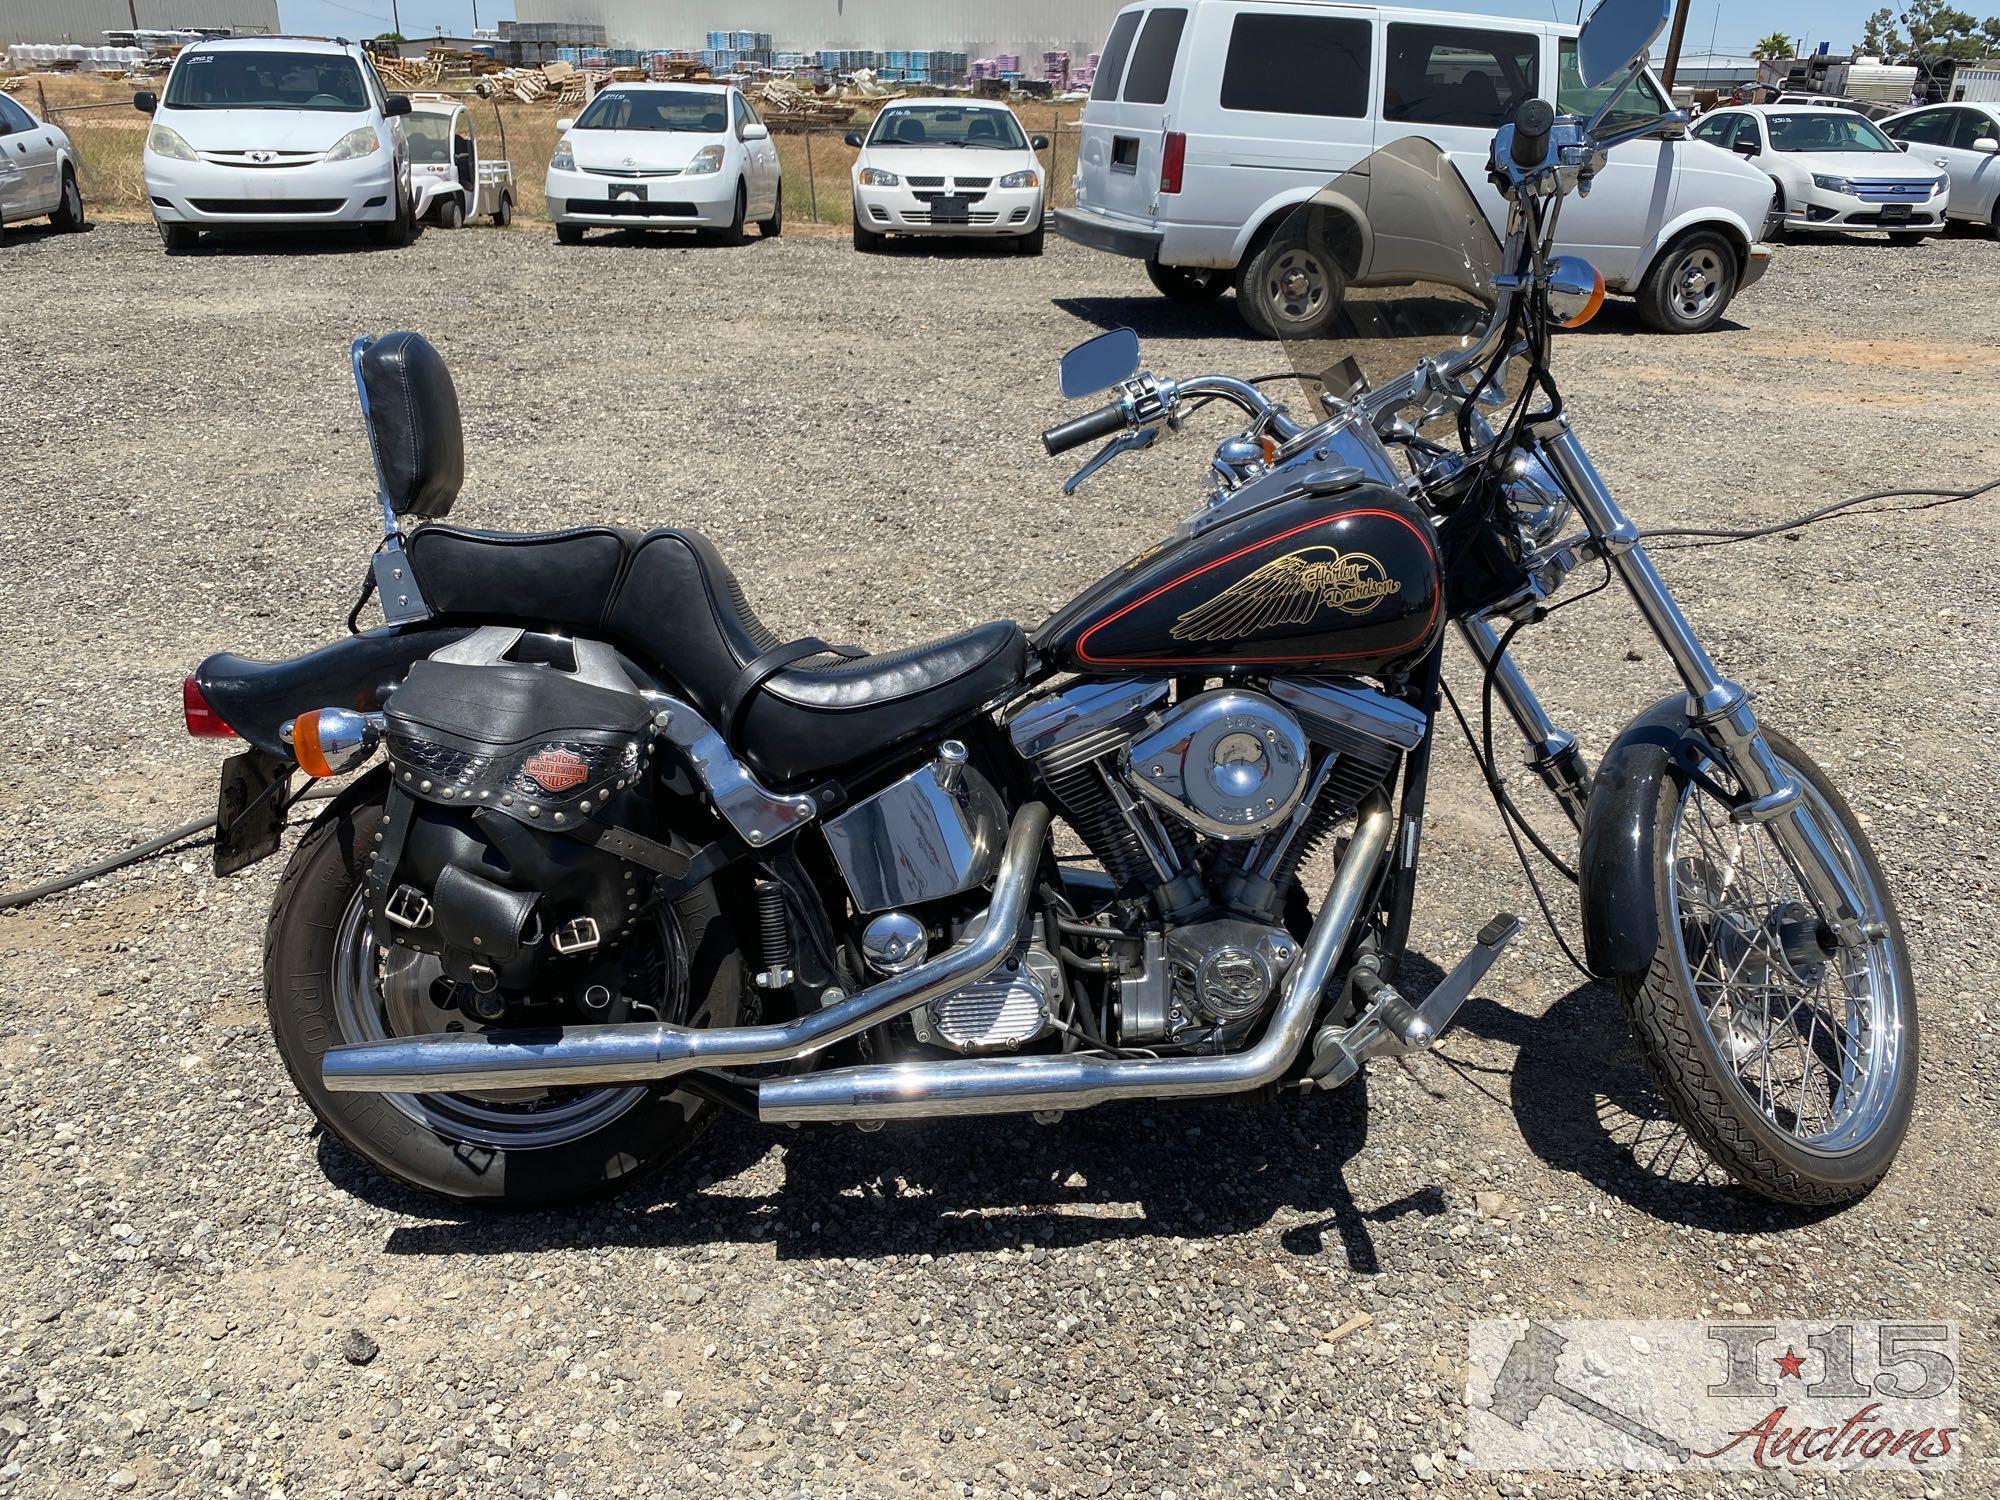 1986 Harley Davidson (TURNS OVER BUT DOES NOT START)